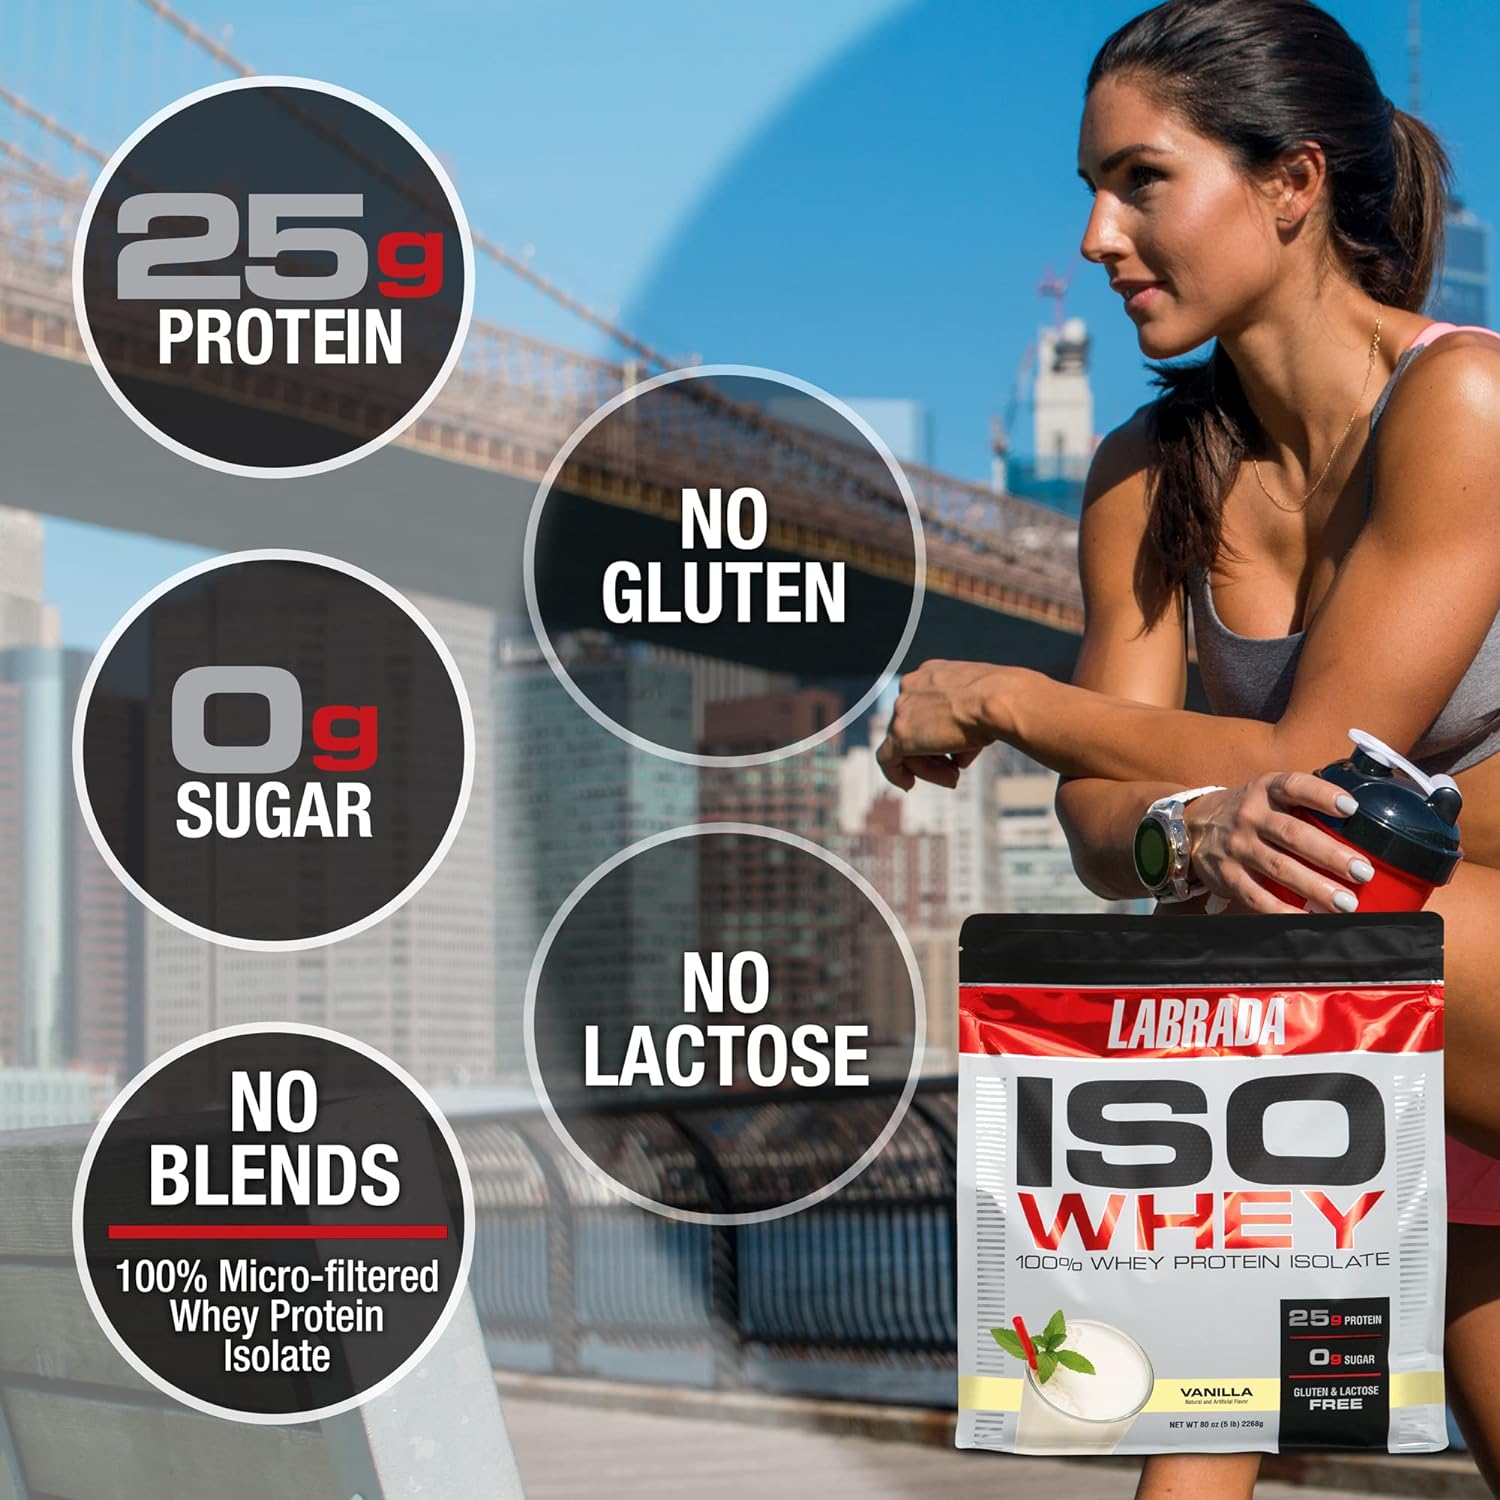 (BBT) Iso Whey Labrada (5Lbs - 2.3Kg) Whey Protein Isolate Hỗ Trợ Tăng Cơ Giảm Mỡ Bổ Sung Bcaa, Glutamine Không Lactose